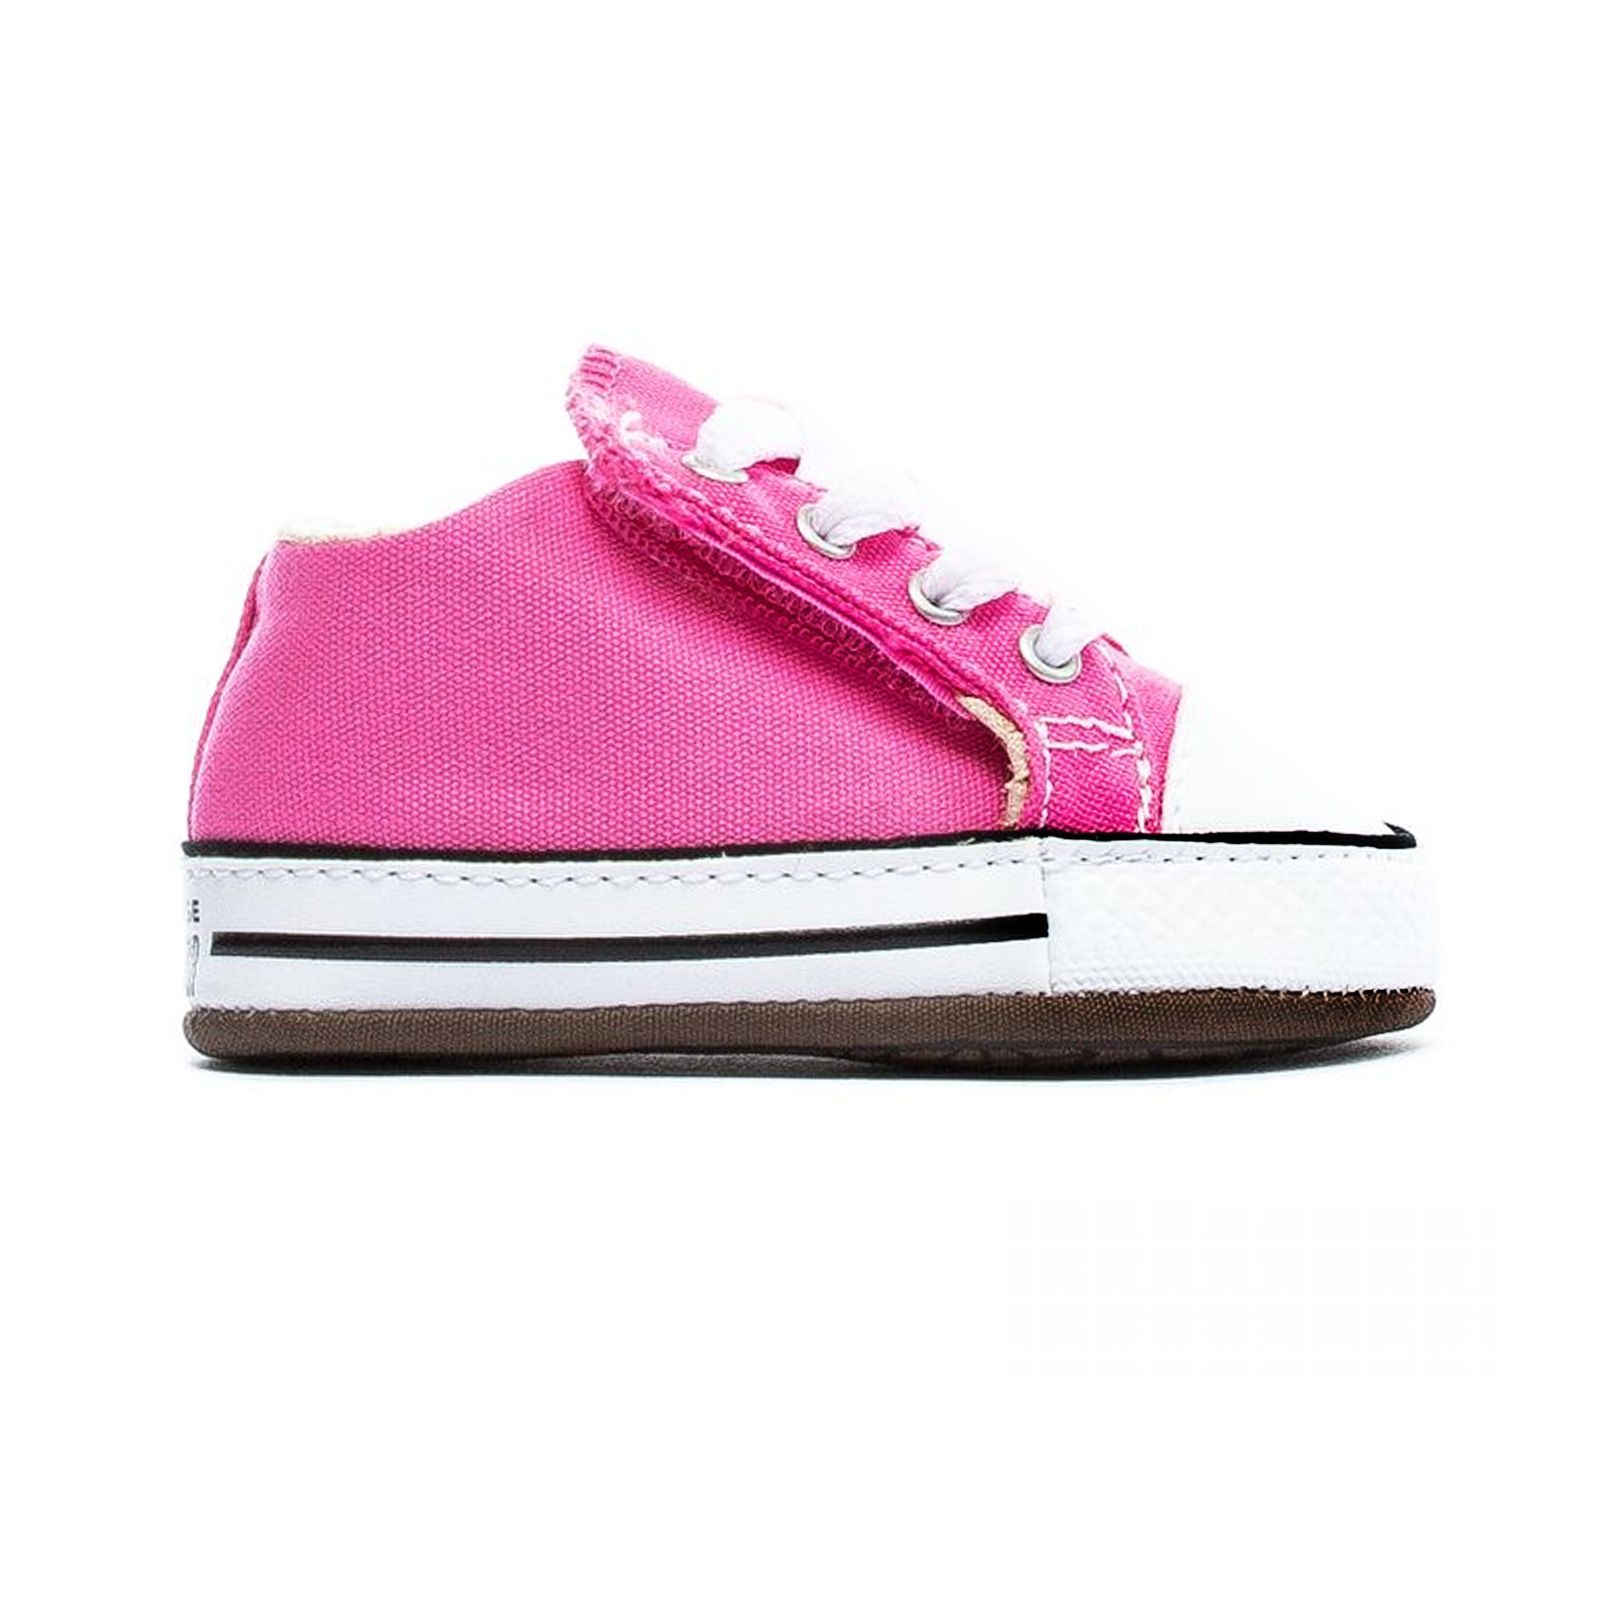 Converse - CHUCK TAYLOR ALL STAR CRIBSTER CANVAS COLOR - 650-PINK/NATURAL IVORY/WHITE Παιδικά > Παπούτσια > Sneaker > Παπούτσι Mid Cut